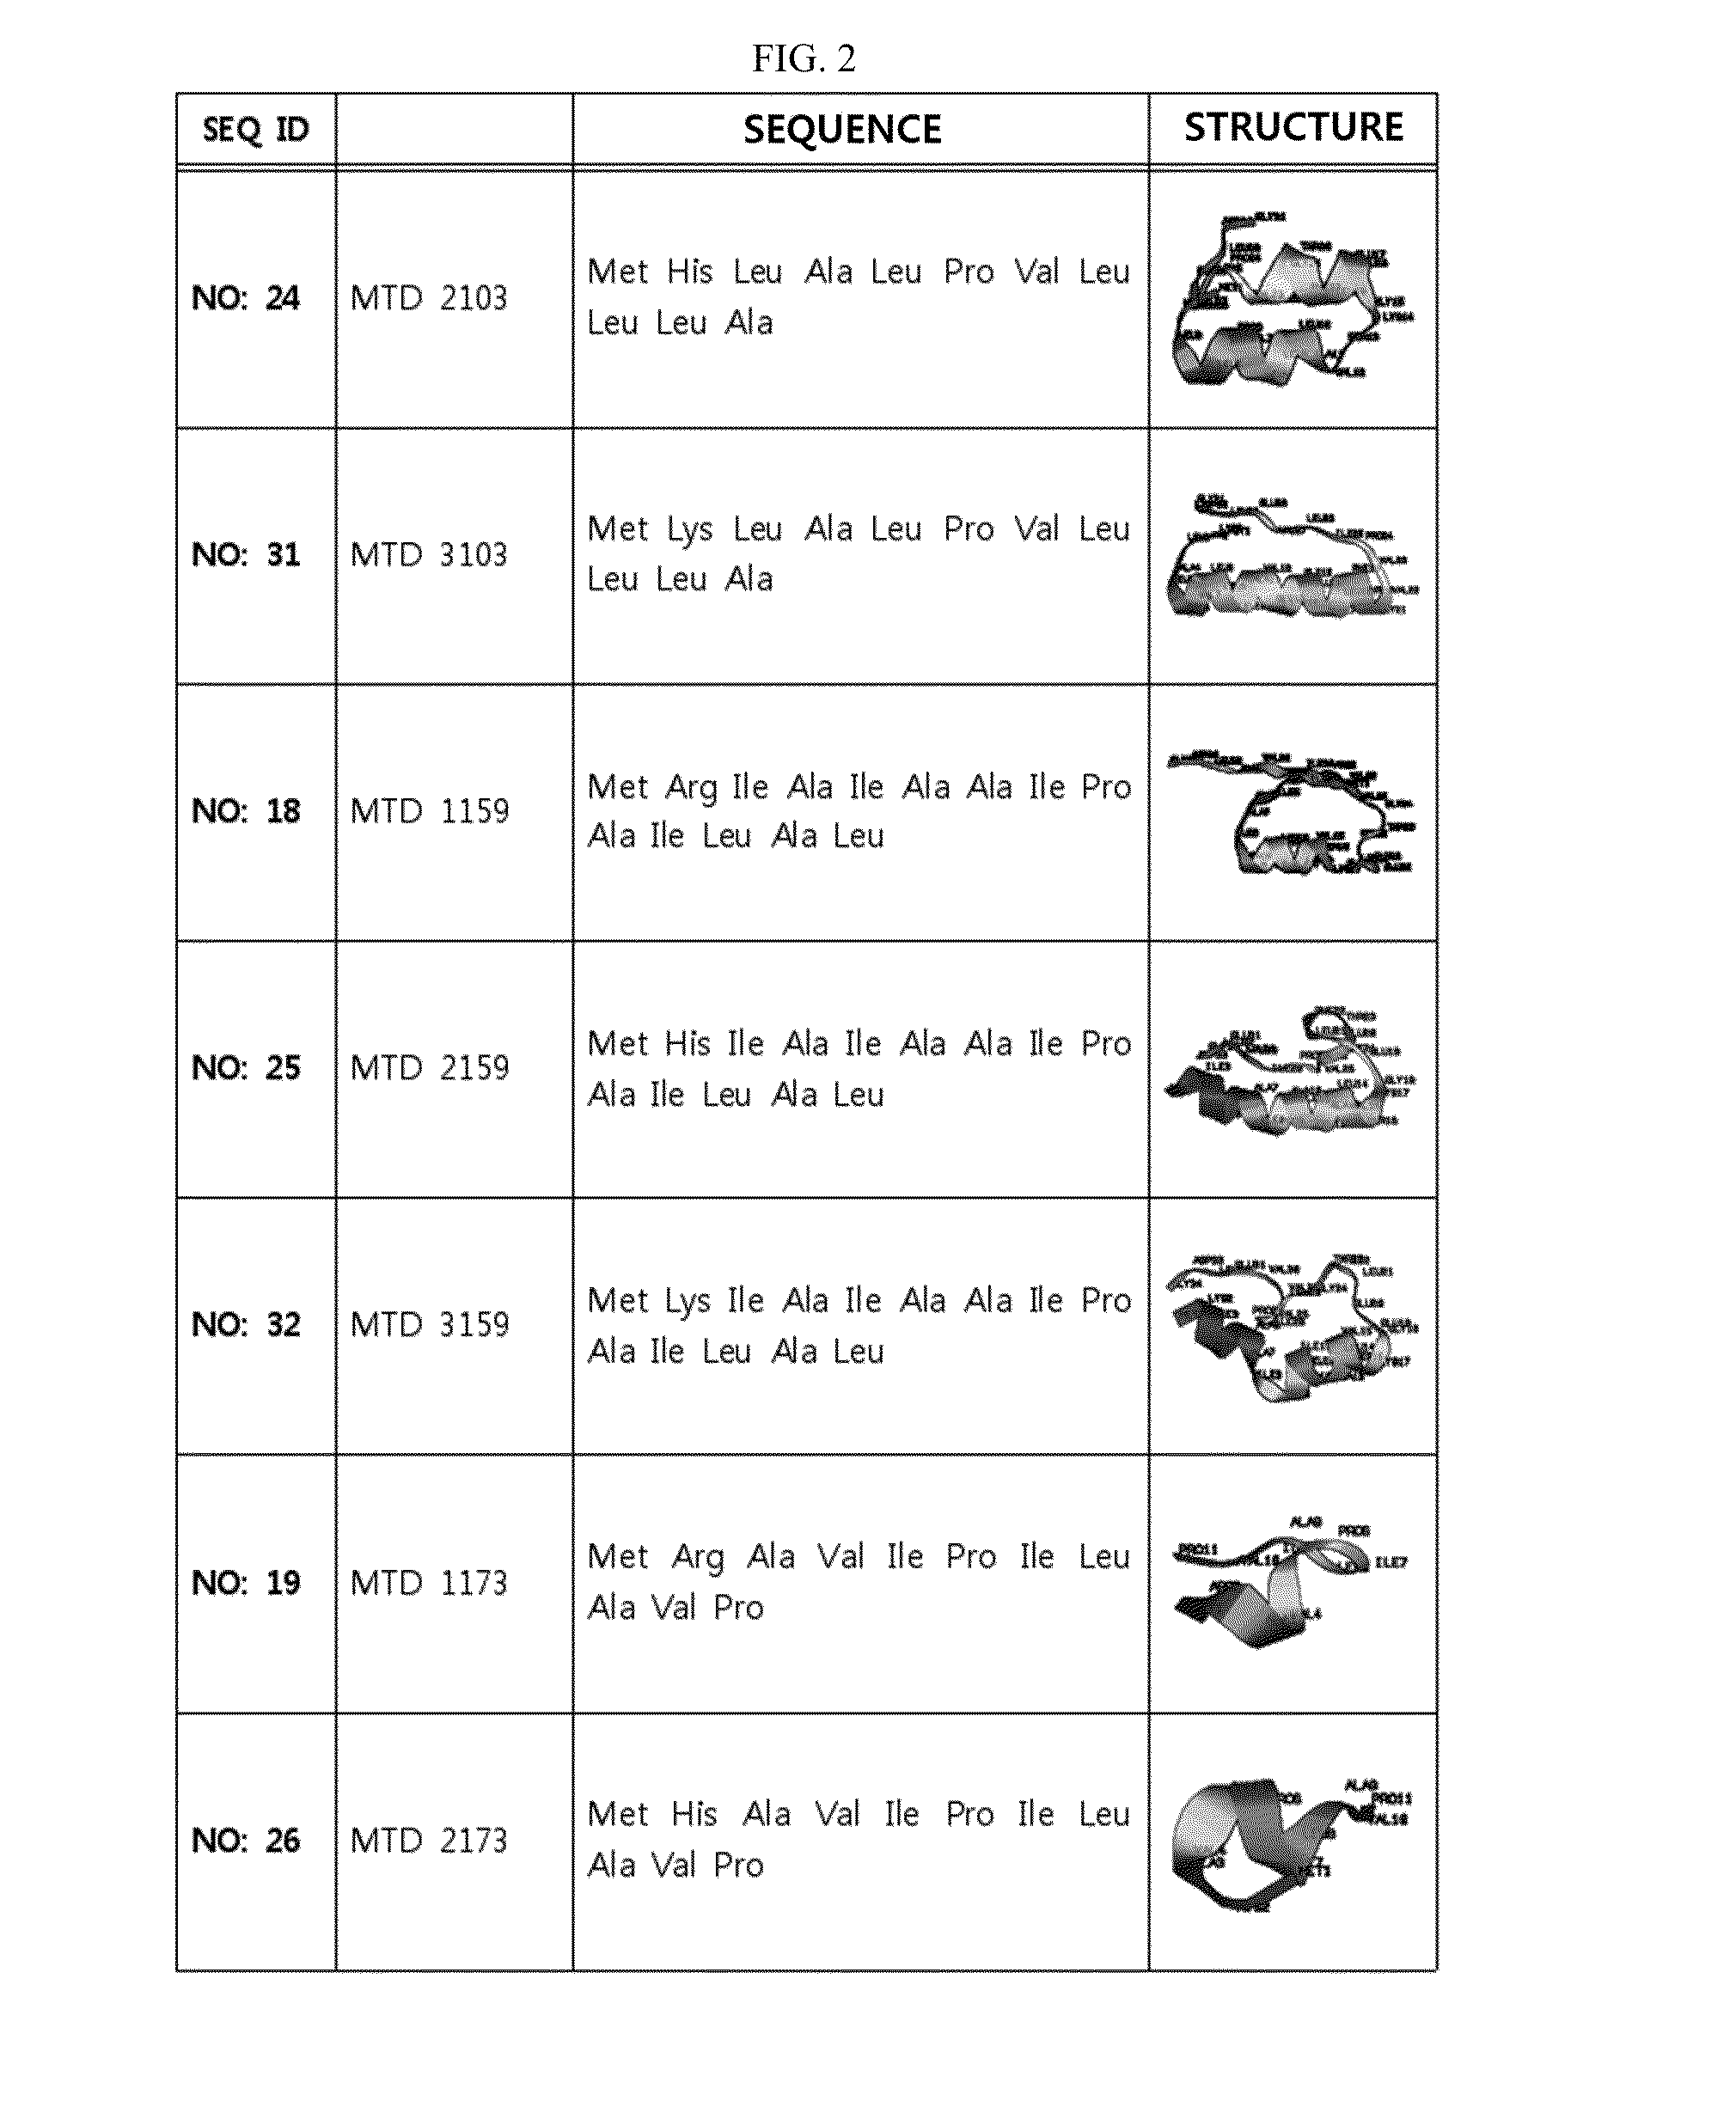 Development of Novel Macromolecule Transduction Domain with Improved Cell Permeability and Method for Using Same